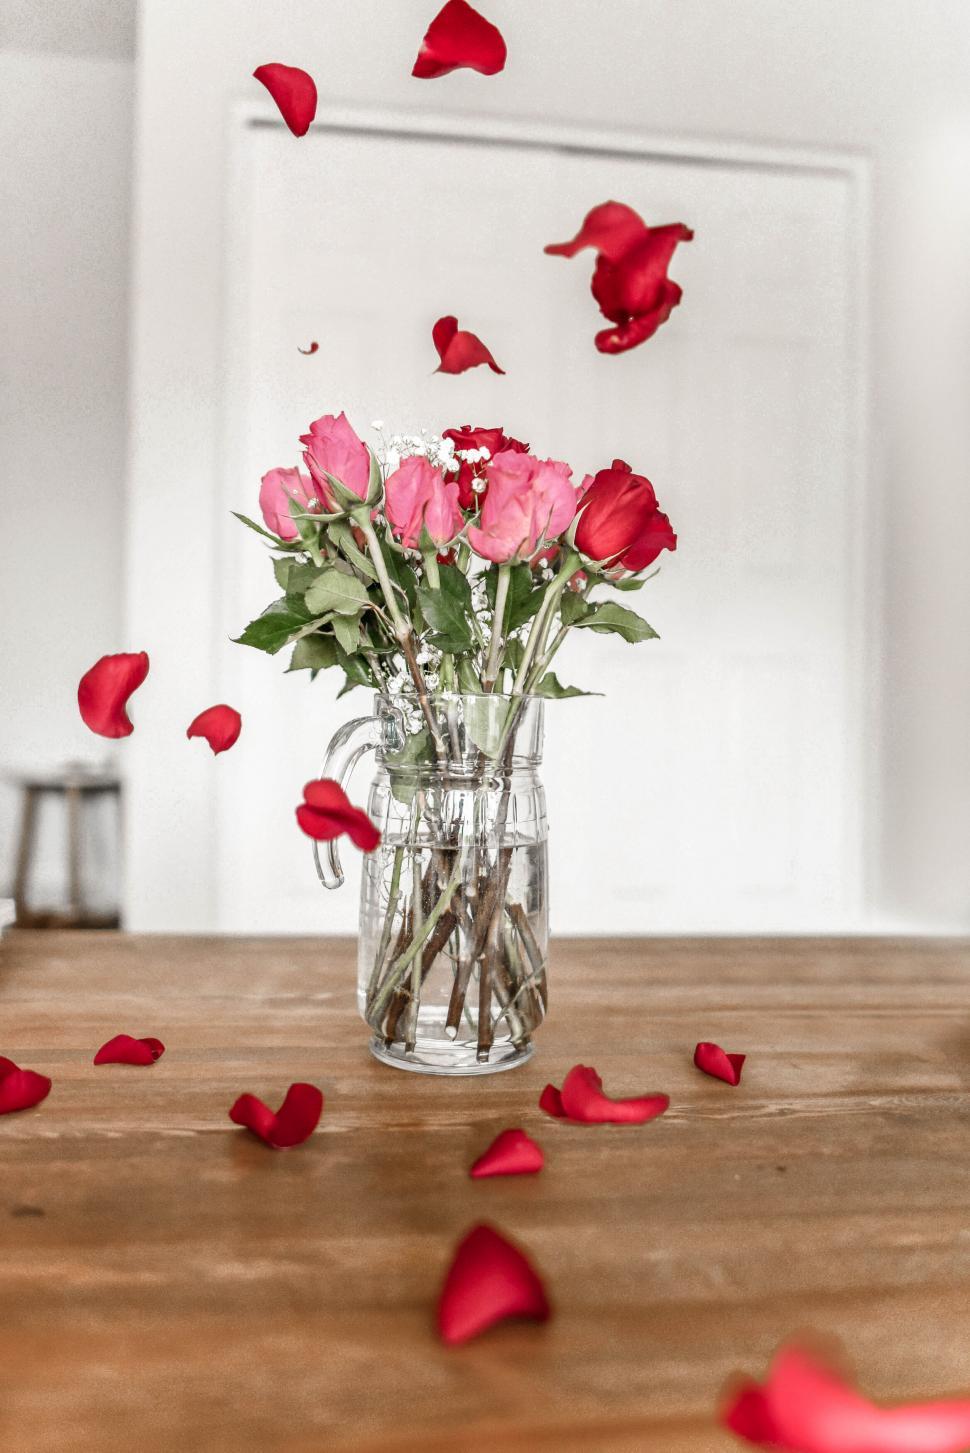 Free Image of Flowers and rose petals on a wooden table 